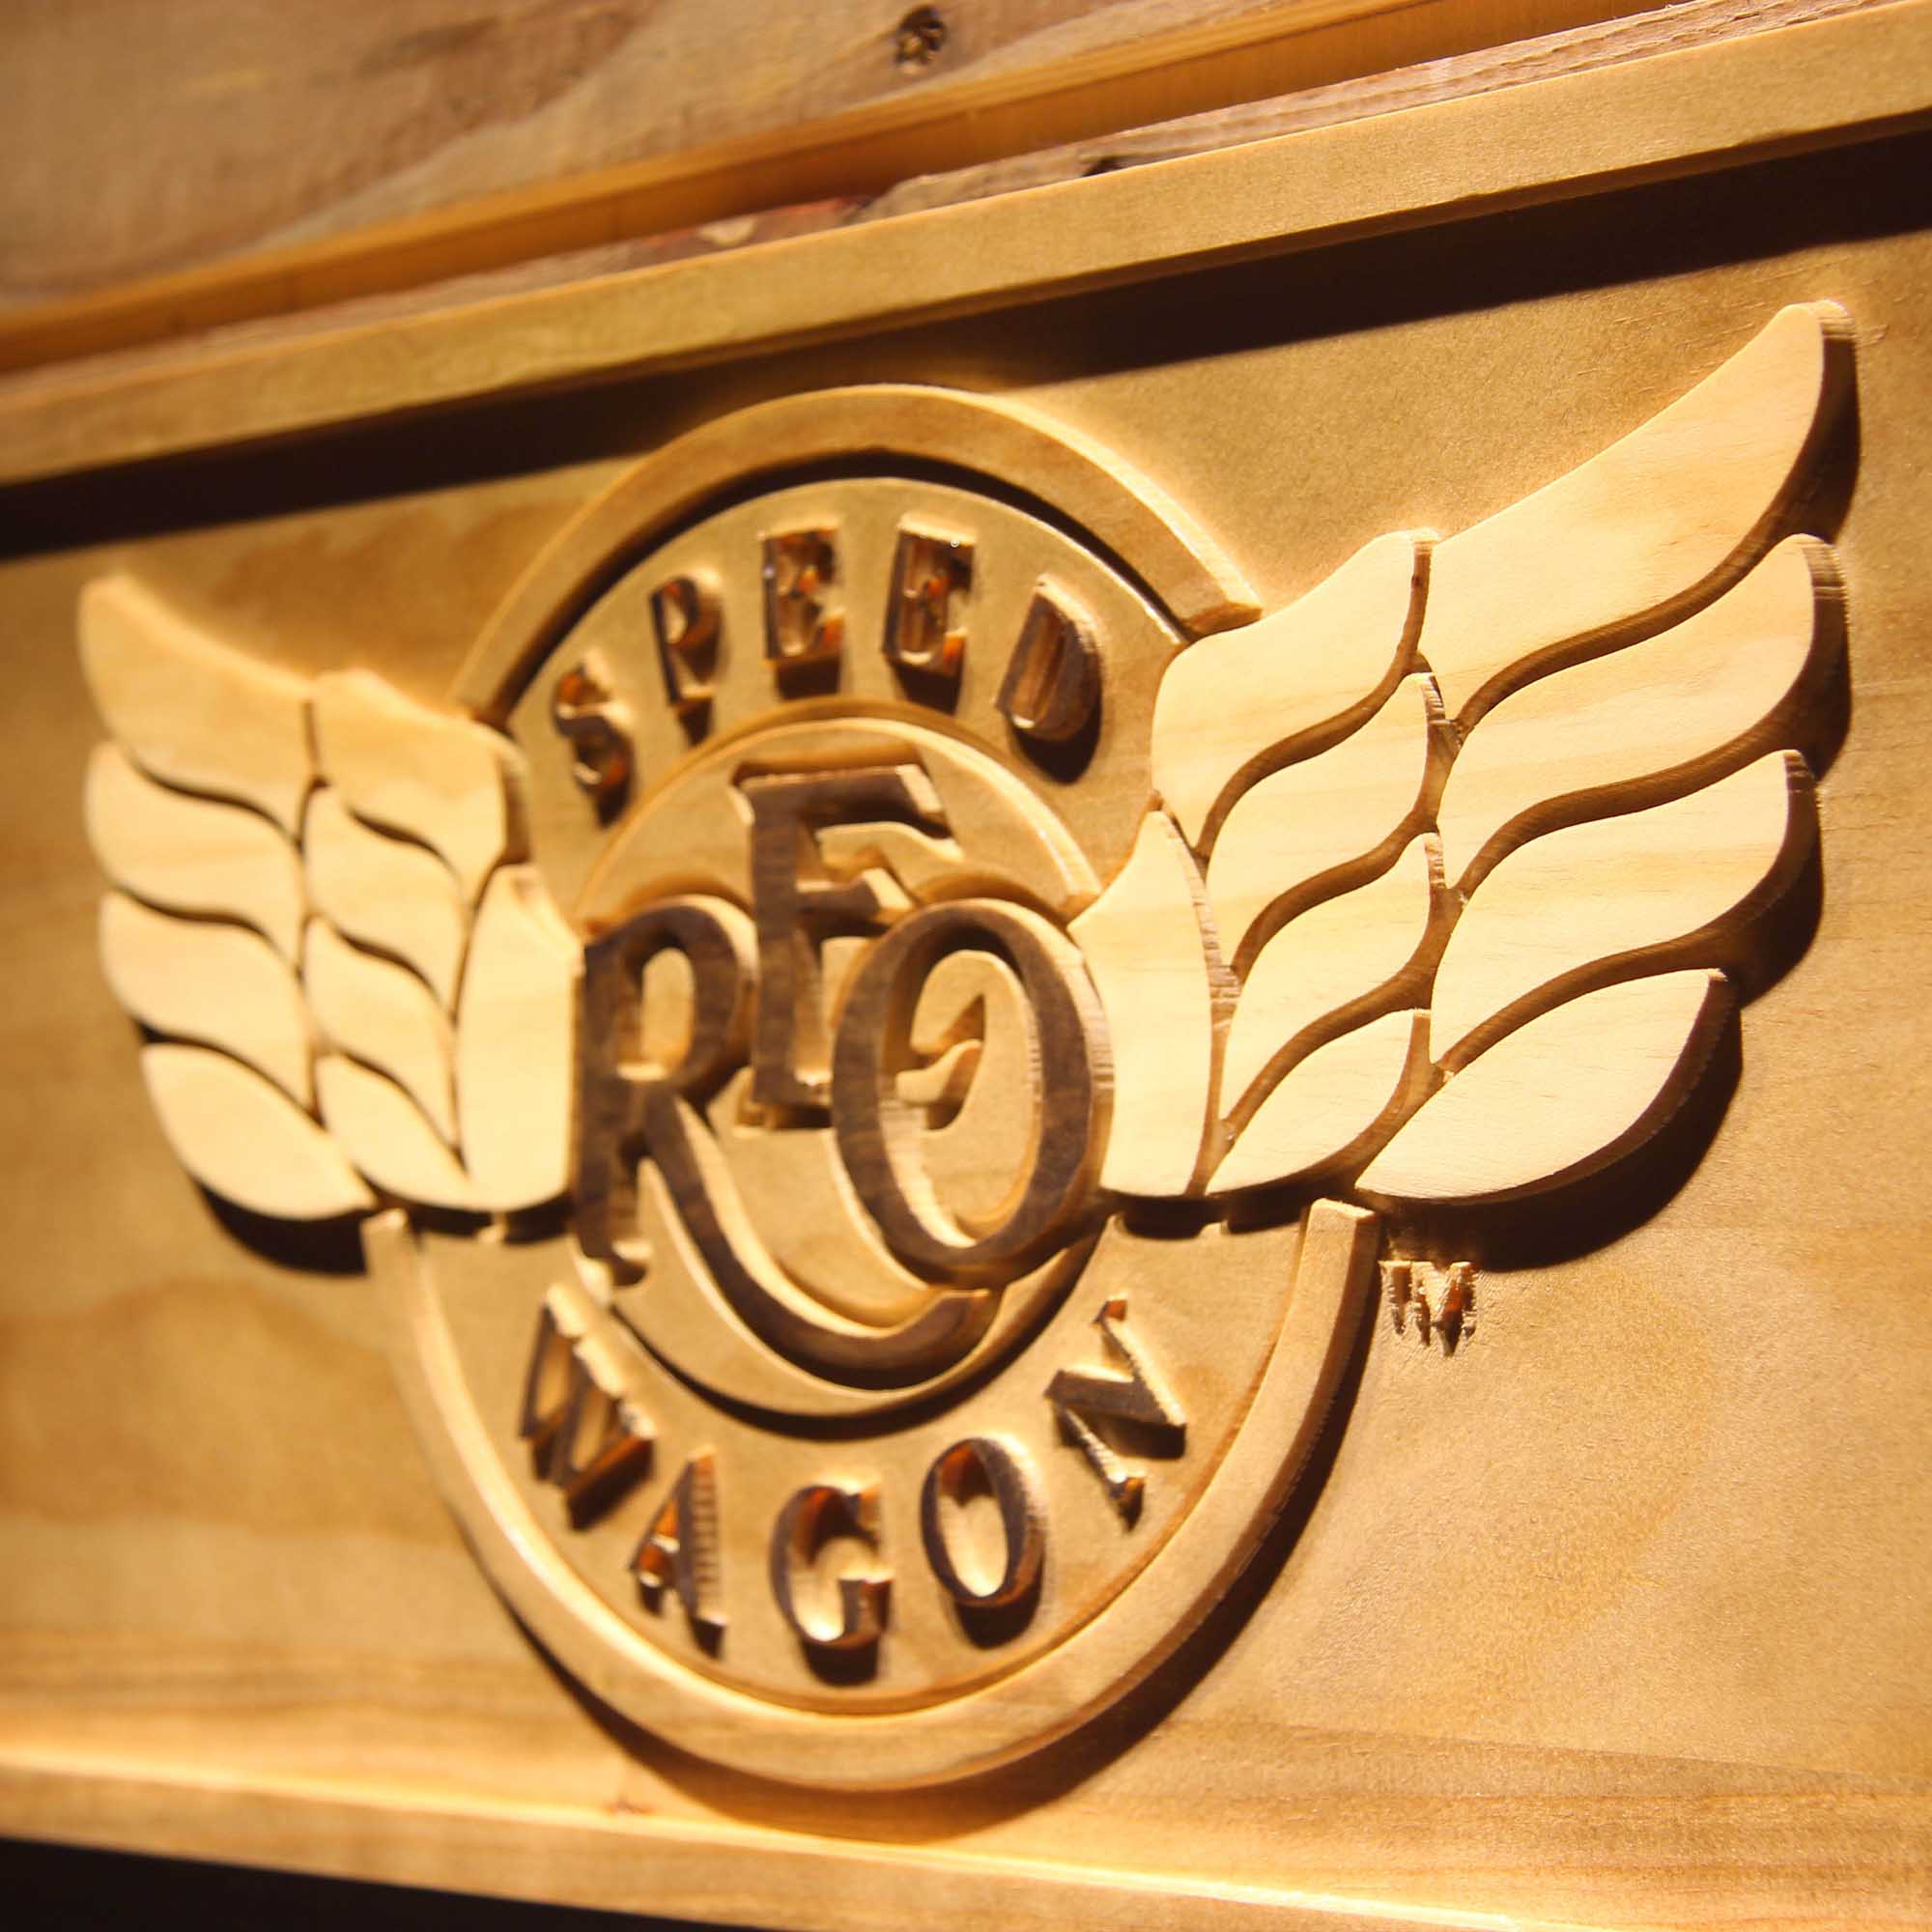 Reo Speedwagon Rock Band 3D Wooden Engrave Sign